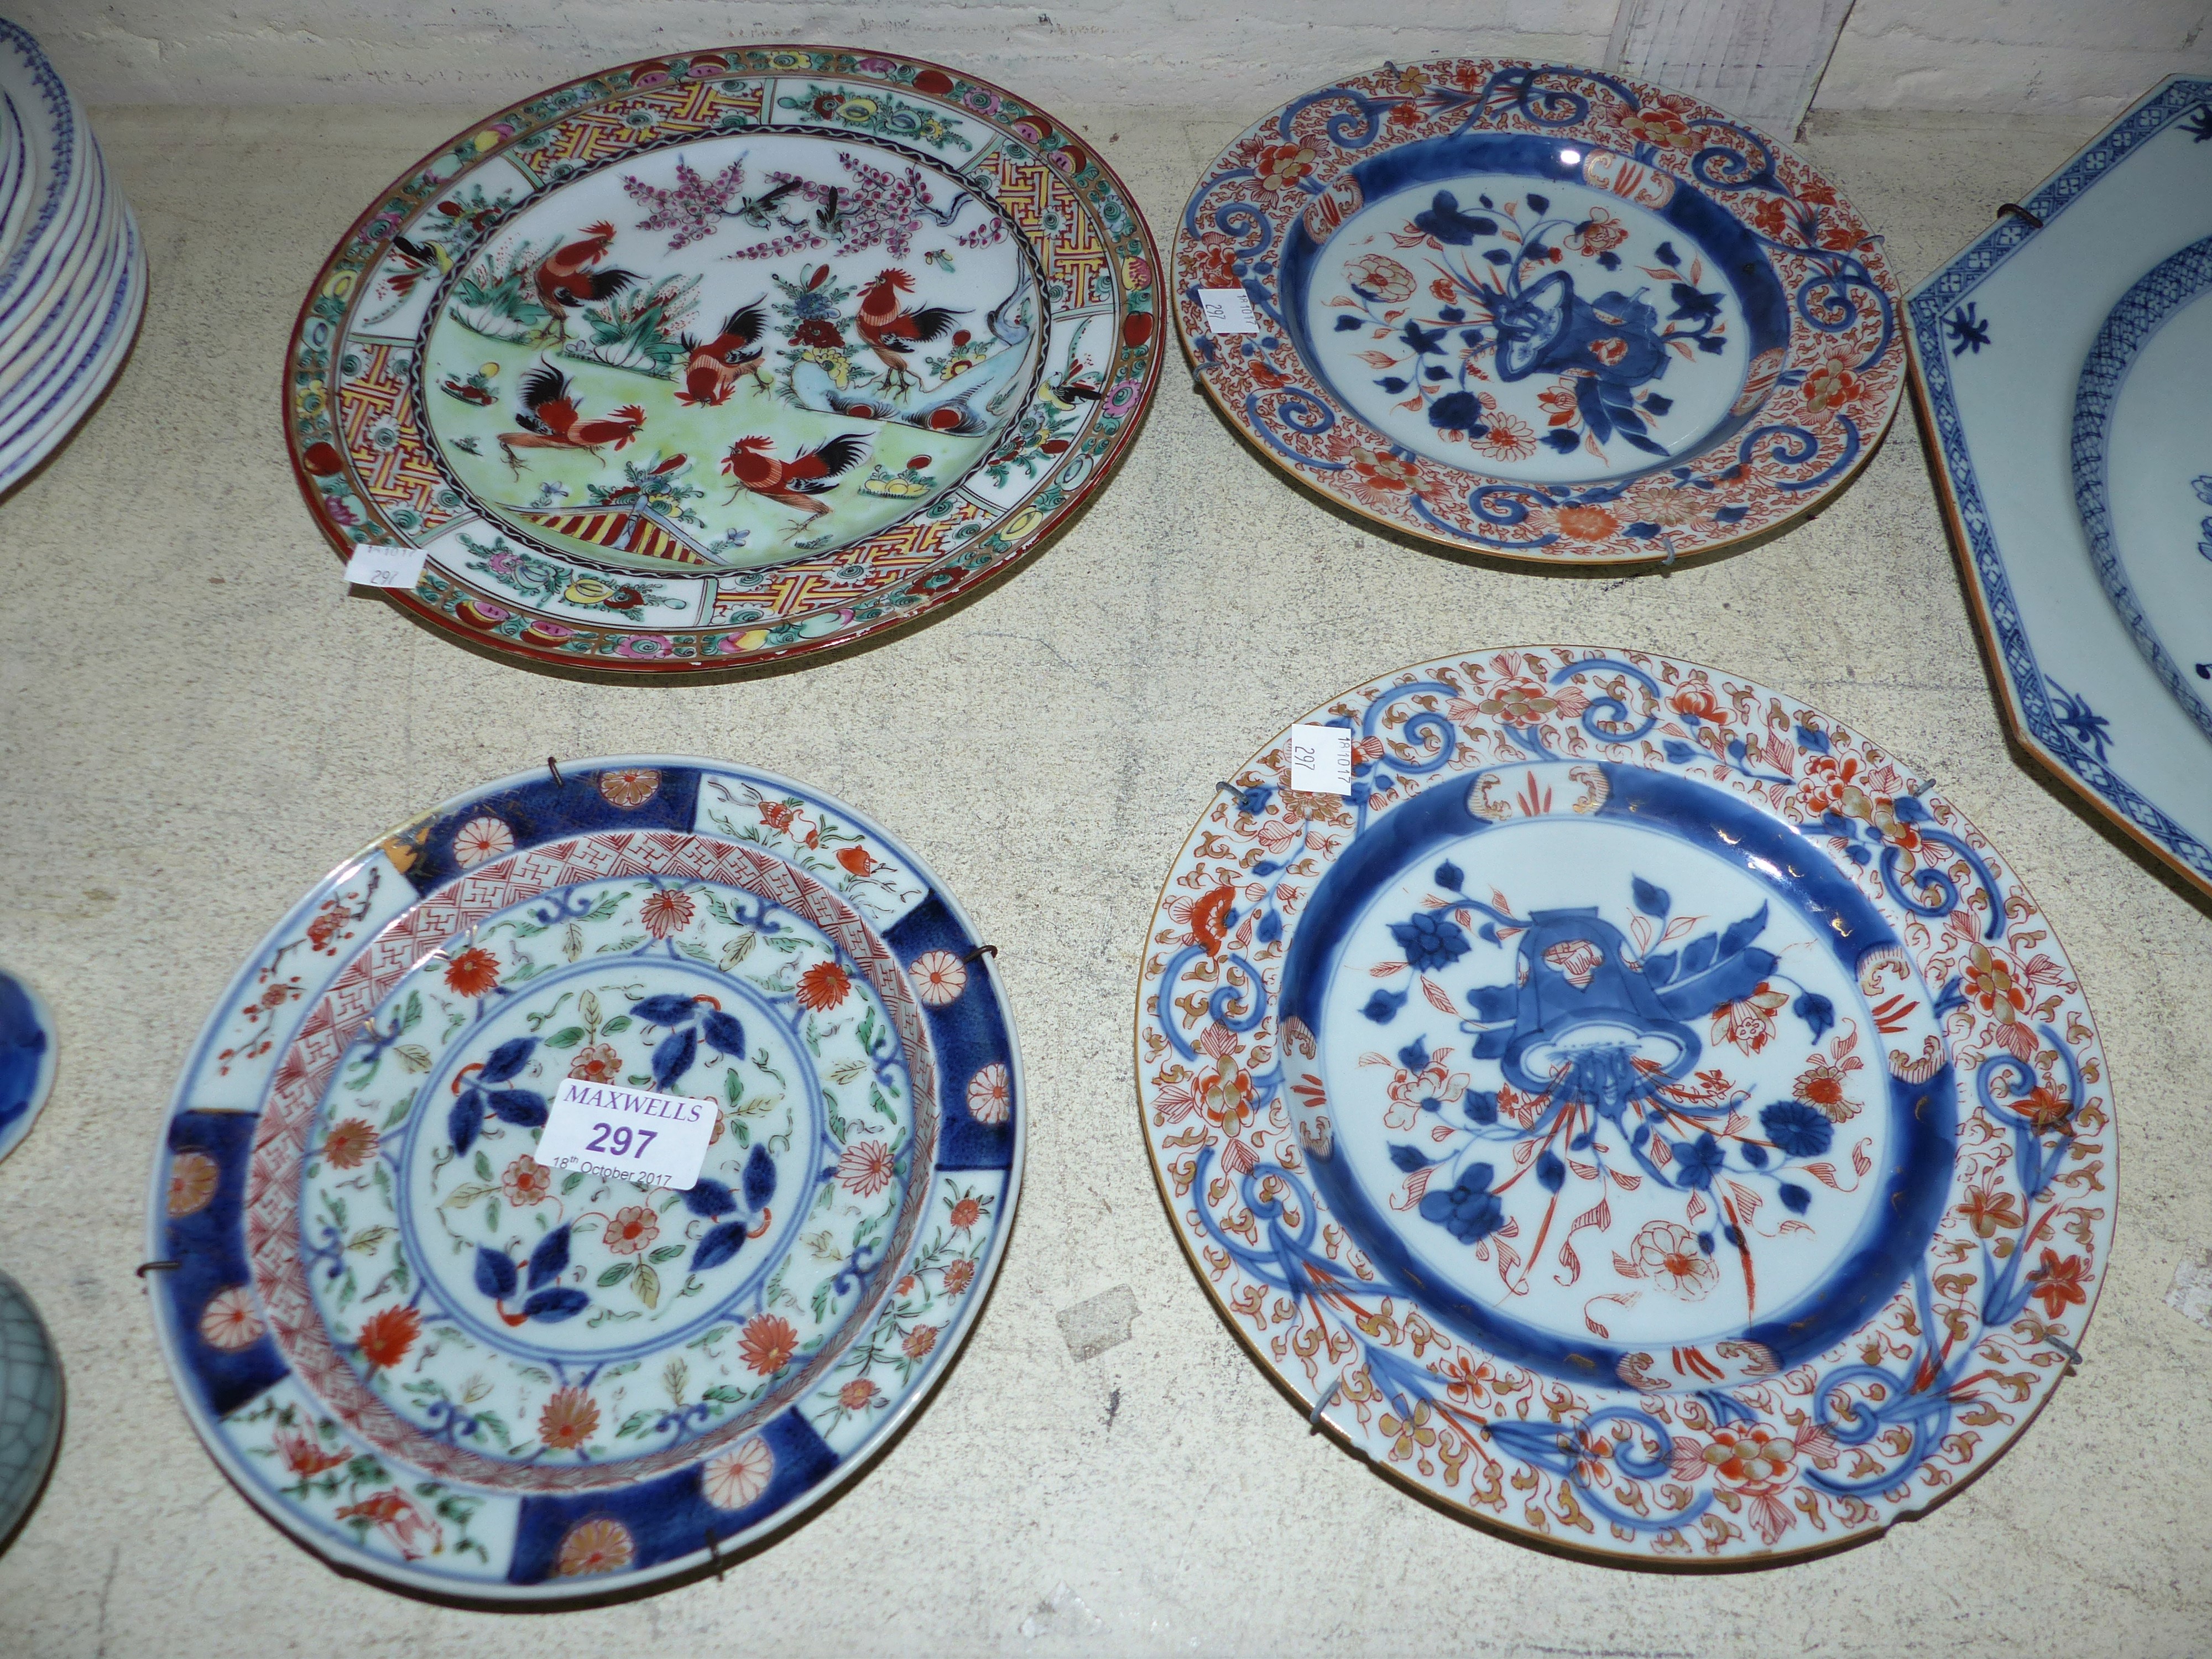 A pair of small Imari wall plaques, diameter 8½"; a similar smaller wall plaque with 4 character